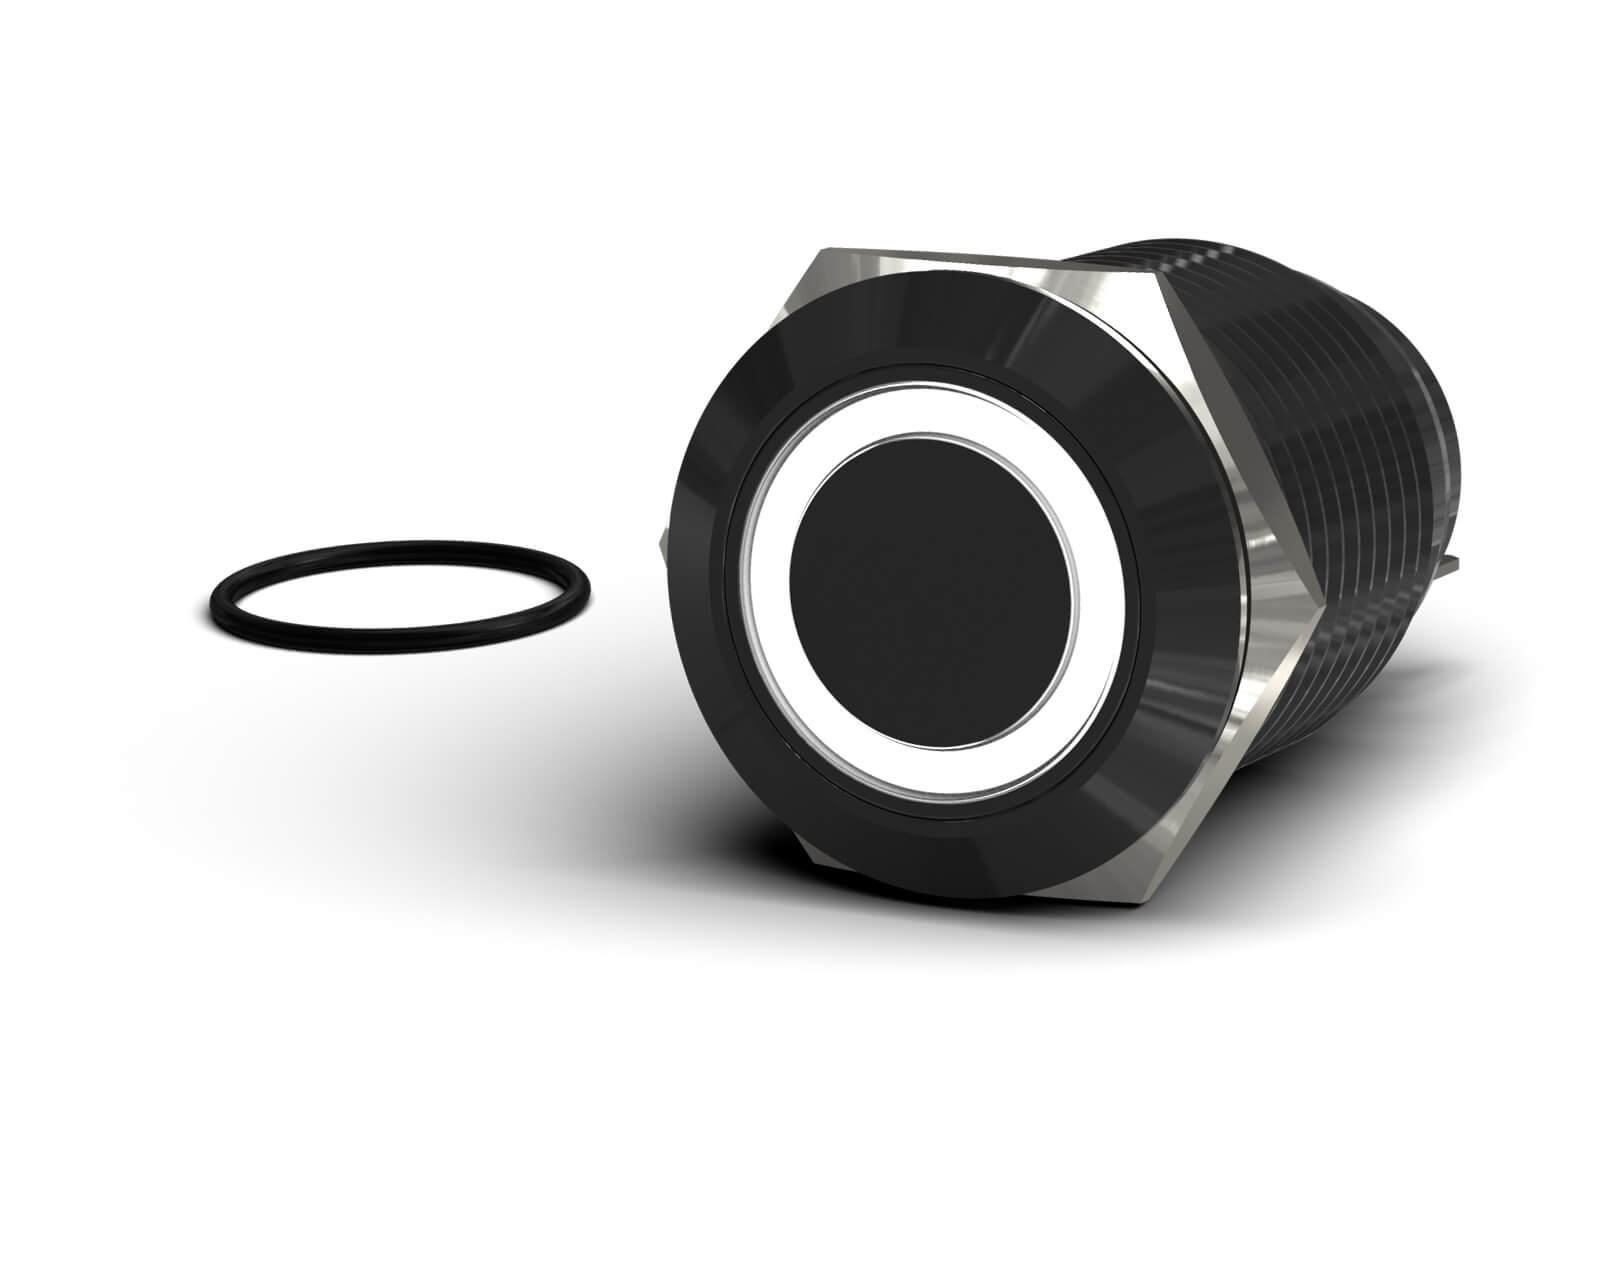 PrimoChill Black Aluminum Latching Vandal Resistant Switch - 22mm - PrimoChill - KEEPING IT COOL White LED Ring